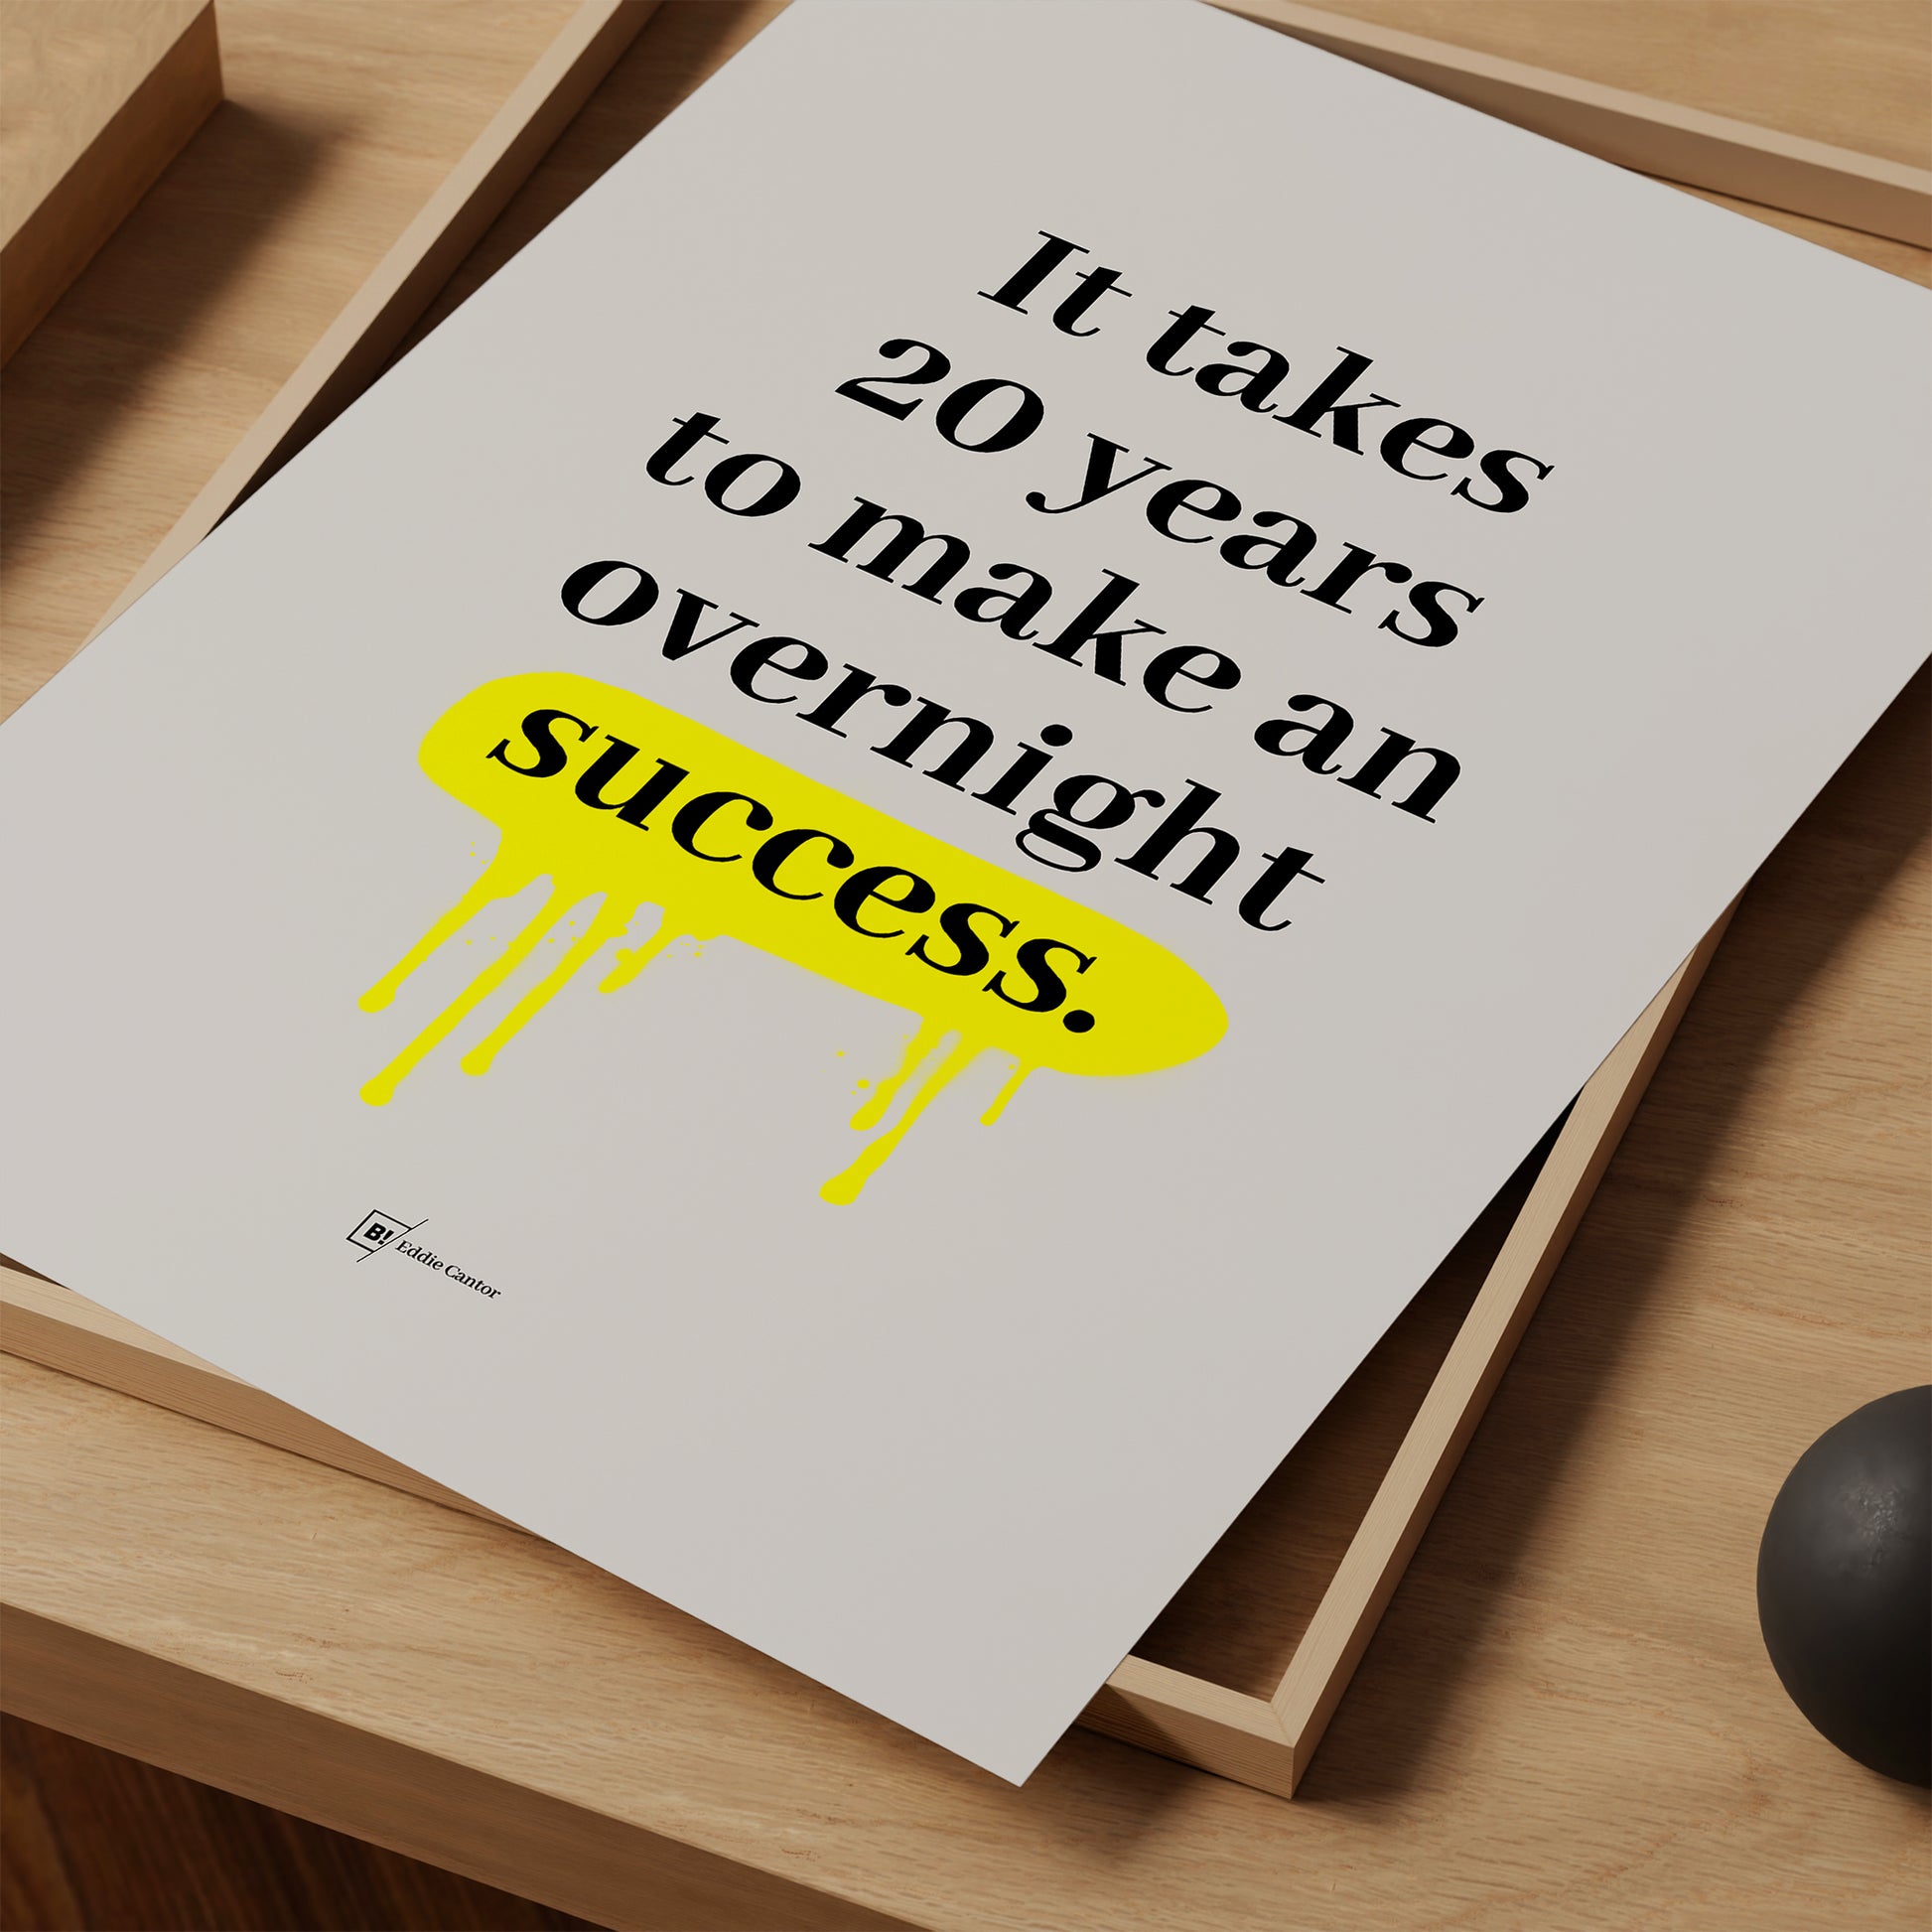 Be inspired by Eddie Cantor's famous "It takes 20 years to make an overnight success" quote art print. This artwork was printed using giclée on archival acid-free paper and is presented as a print close-up that captures its timeless beauty in every detail.